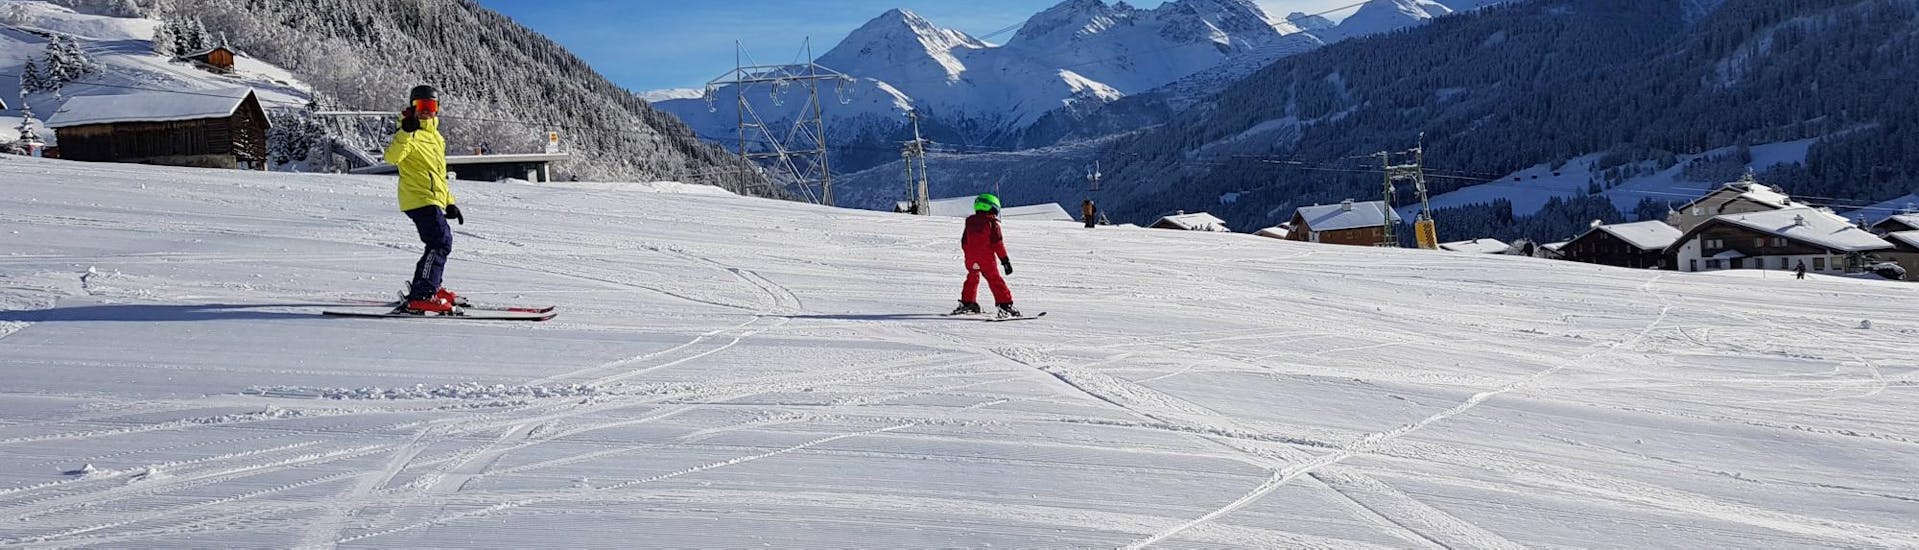 A private ski instructor is supervising a young skier during the Private Ski Lessons for Kids (from 3 years) - All Levels with Skischule Monntains.